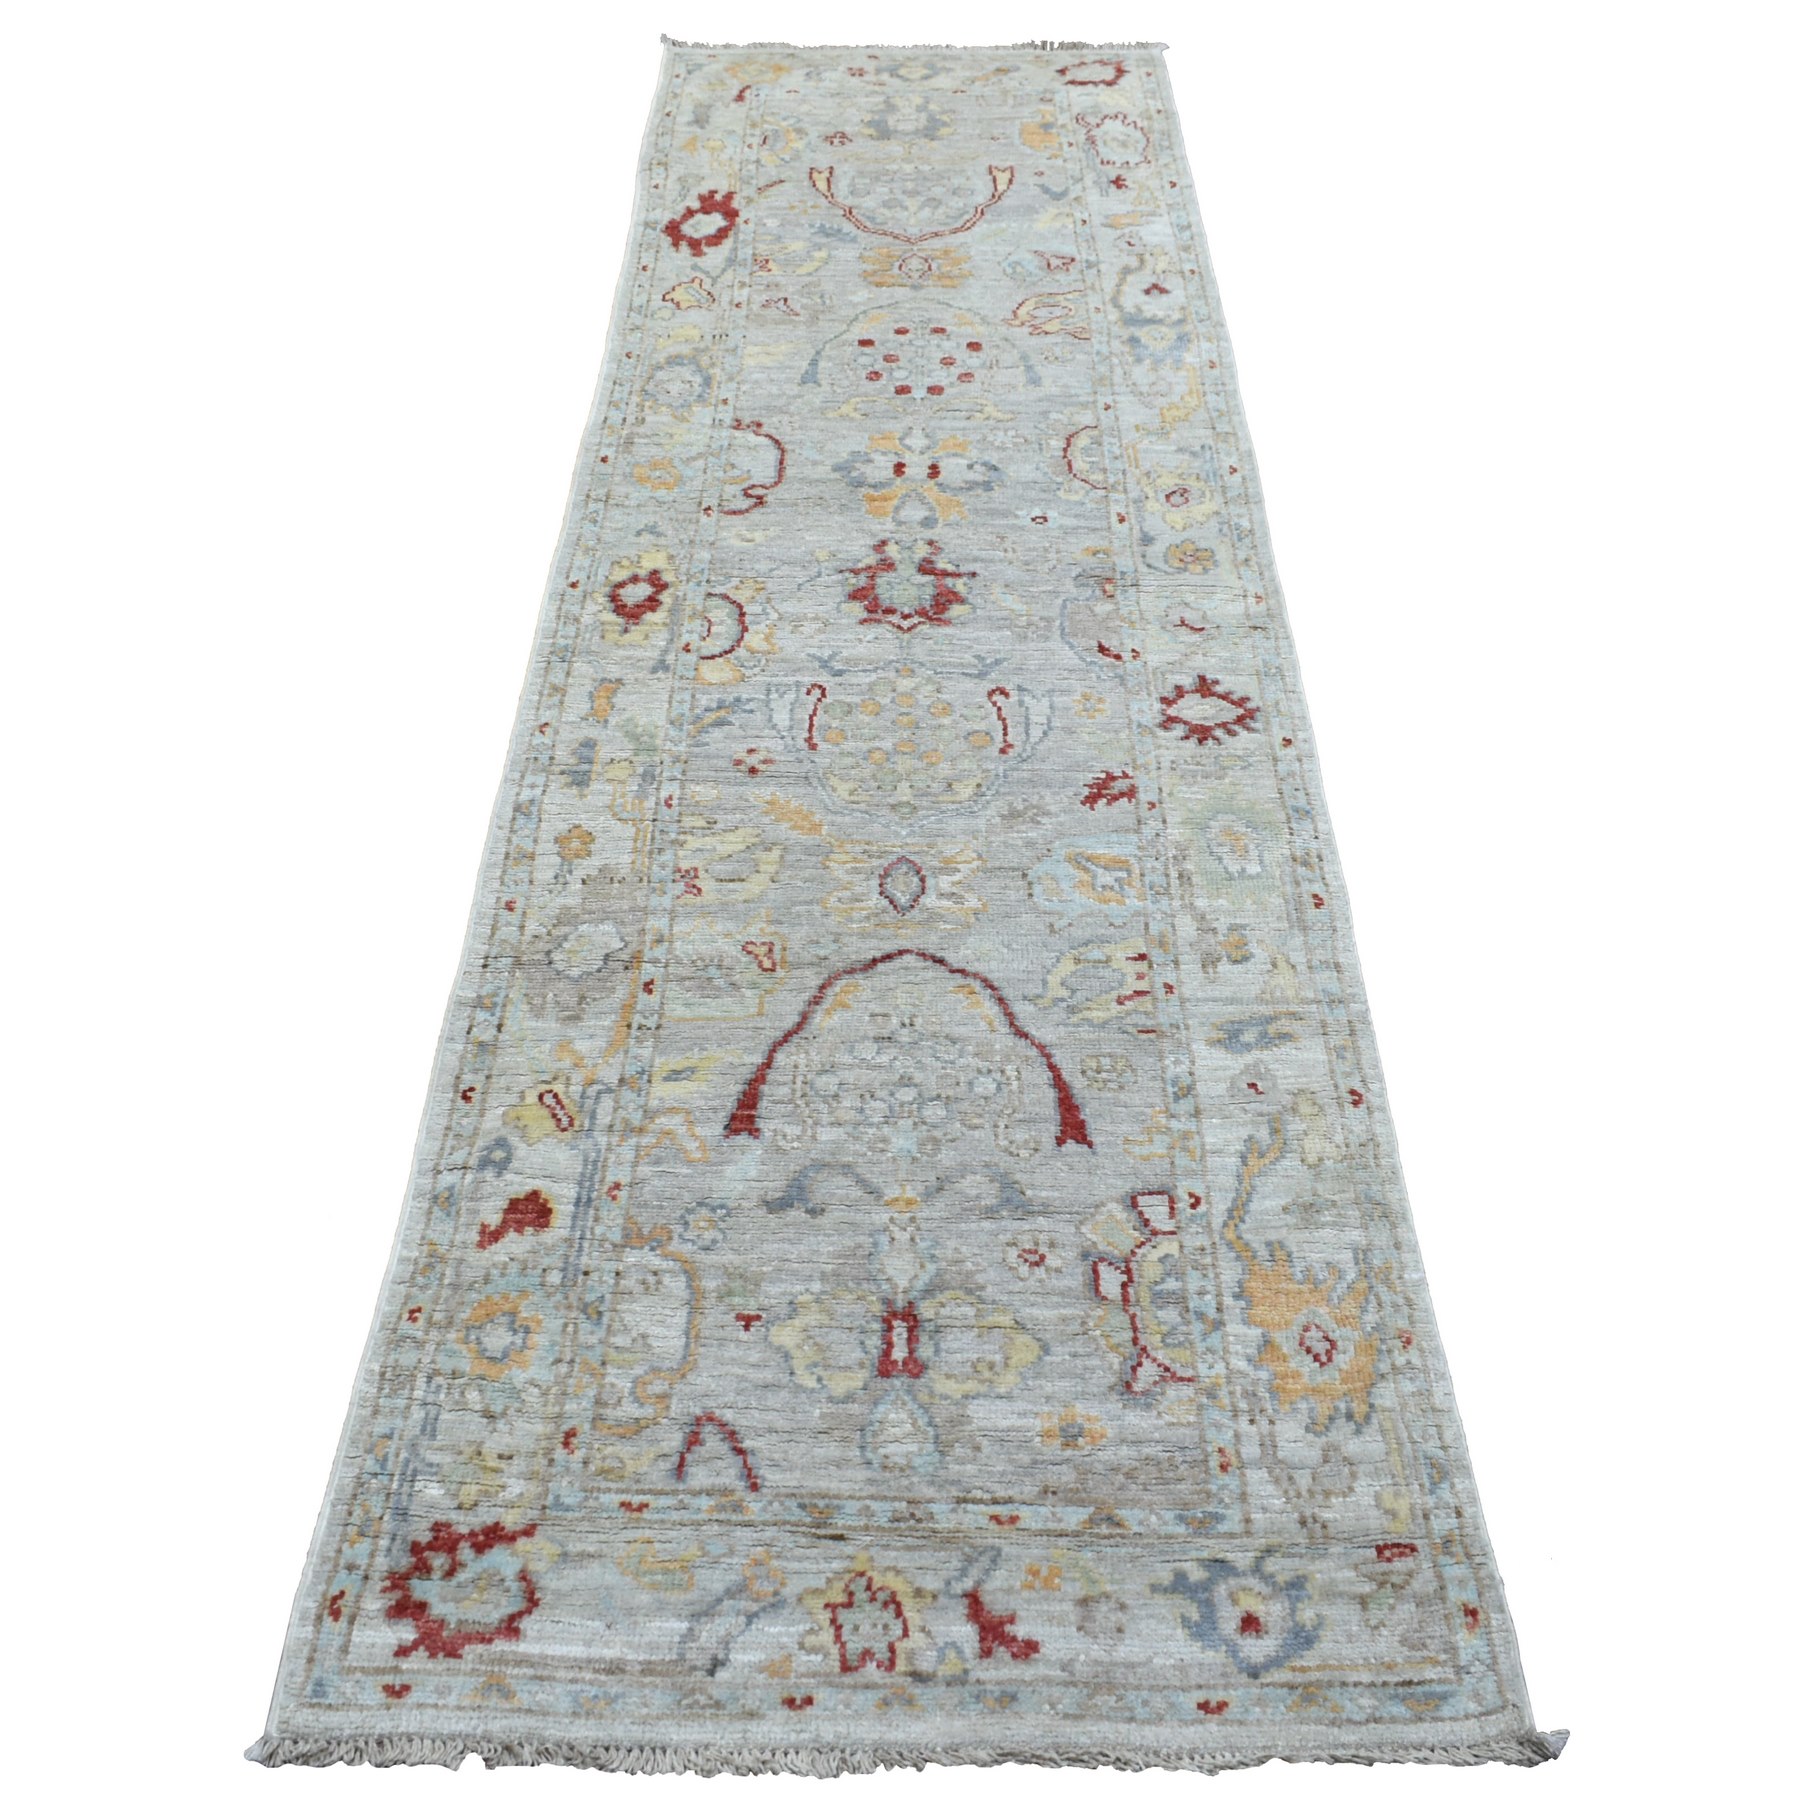 2'9"x9'7" Hand Woven Silver Blue Angora Oushak with Bold Floral Pattern Extra Soft Wool Oriental Runner Rug 